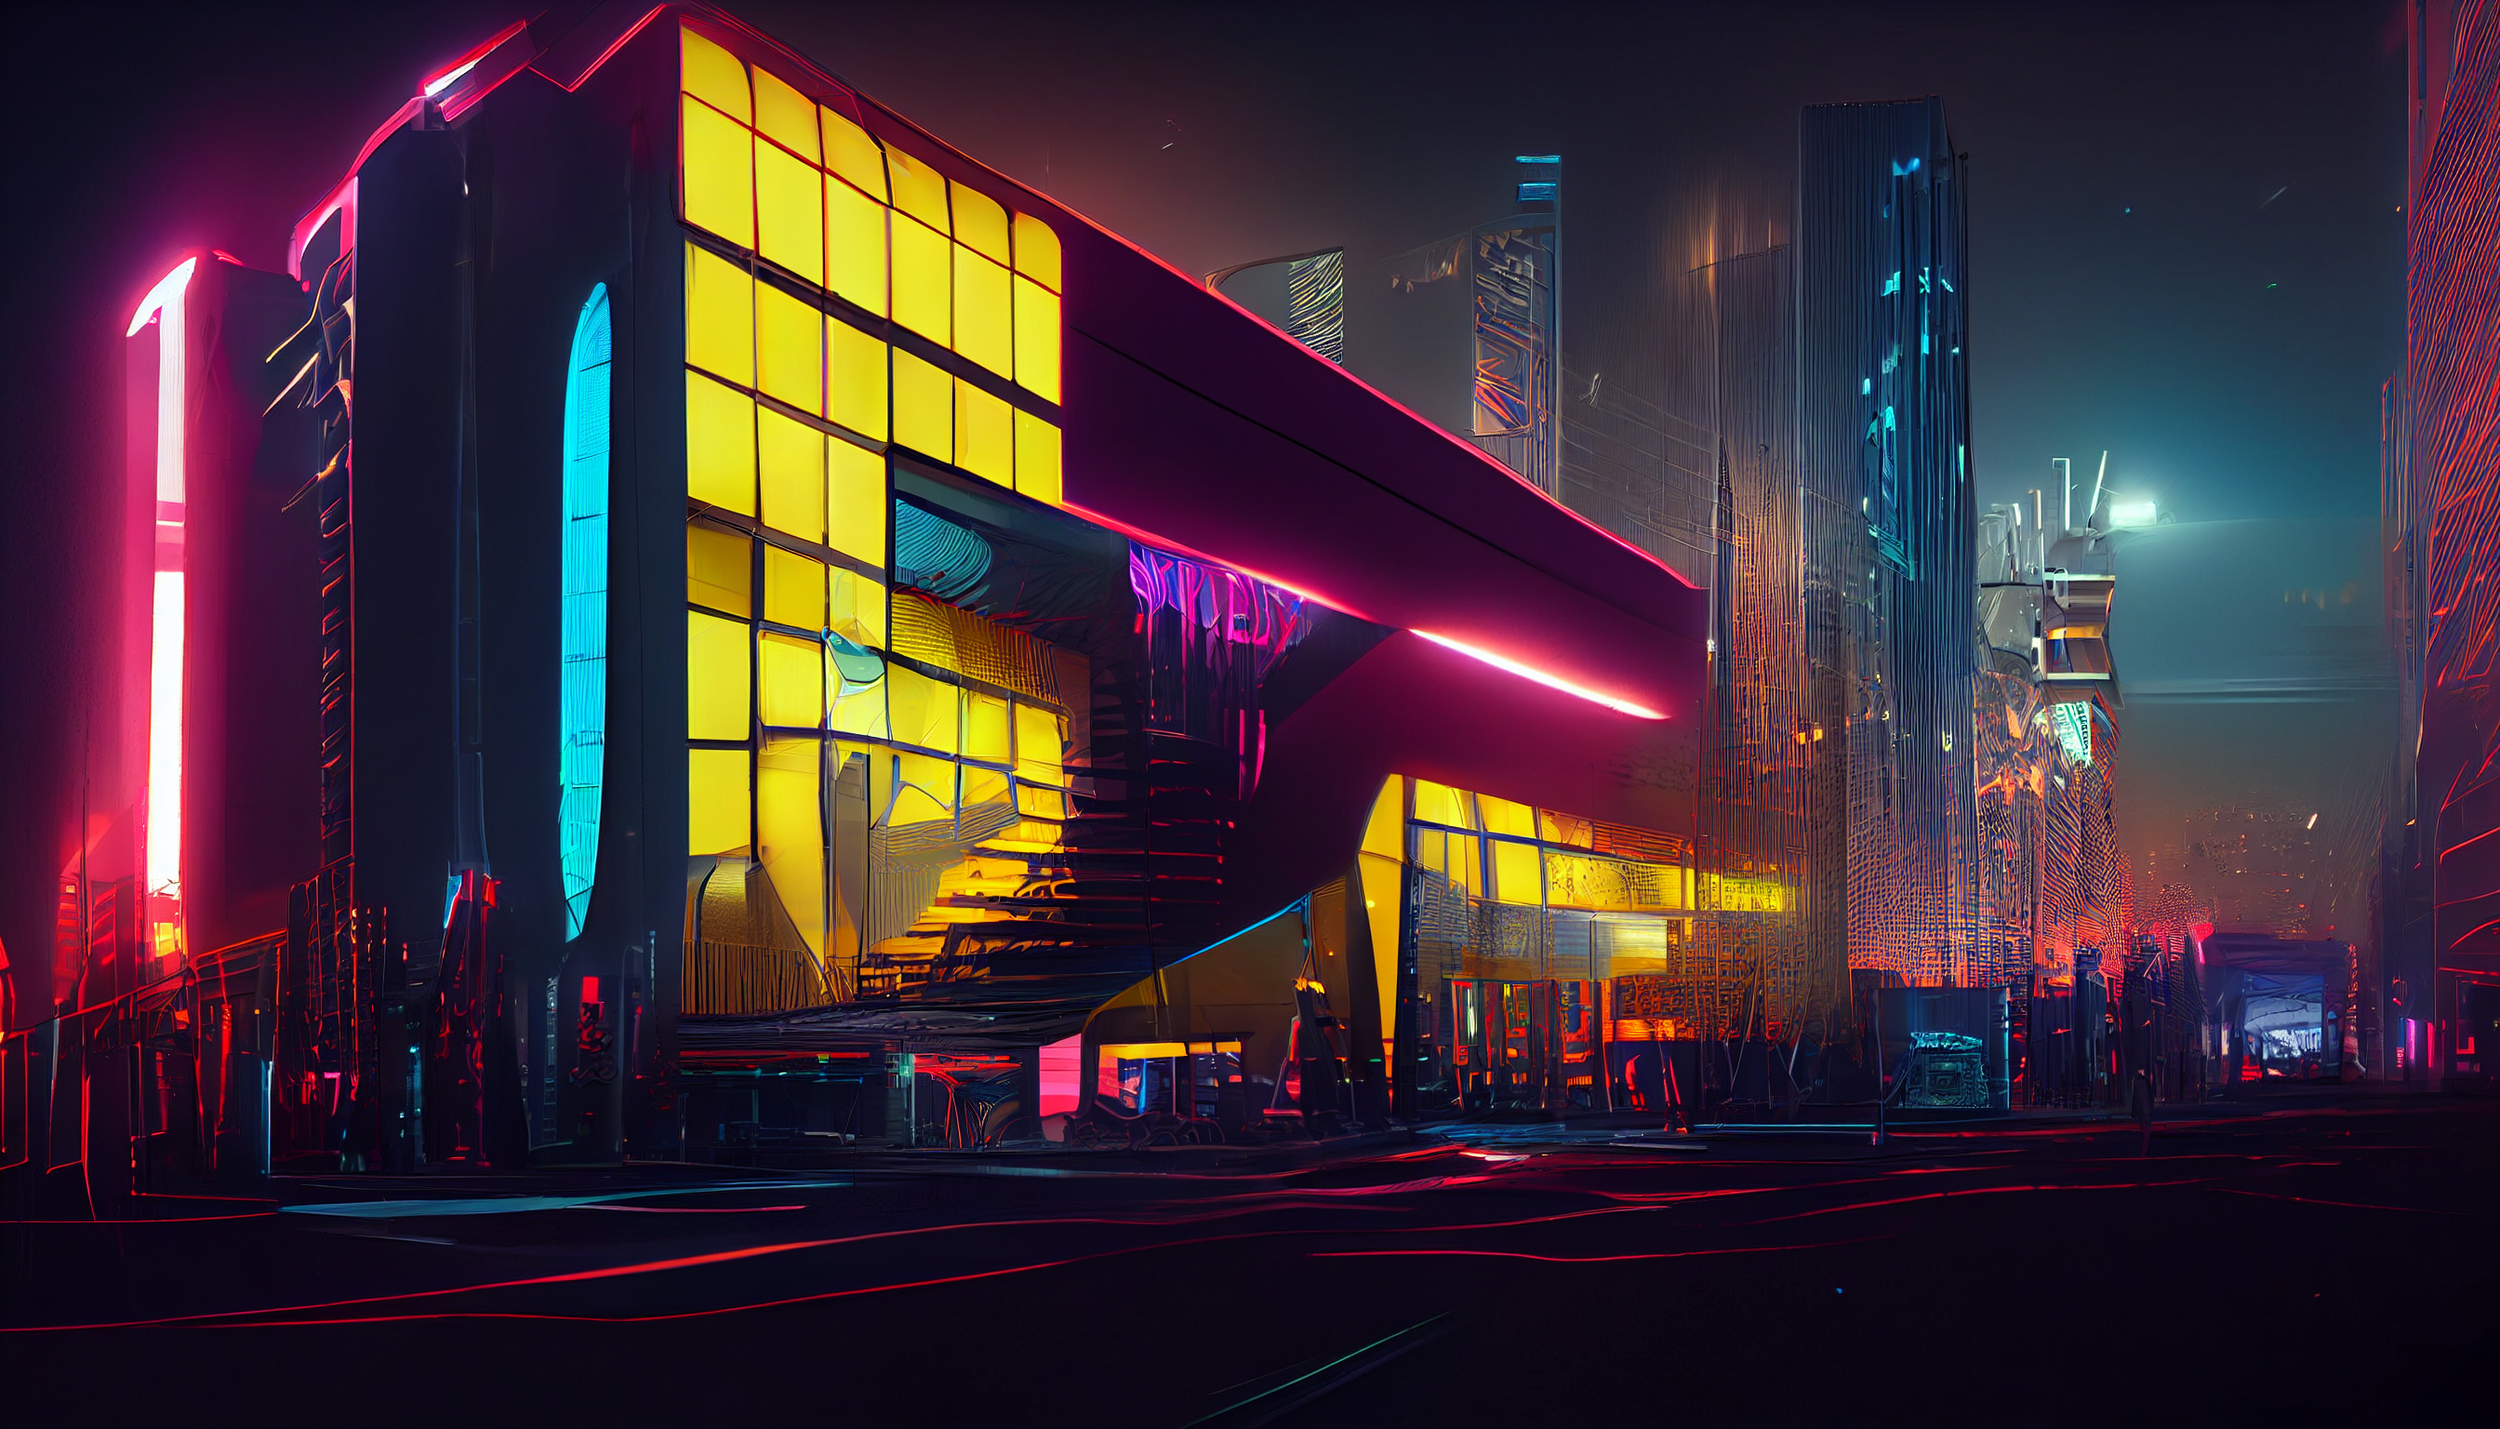 SysteMATTically_Futuristic_cyberpunk_abstract_architecture_buil_ce1852f8-f723-4433-b9ee-efe2390f6974.png